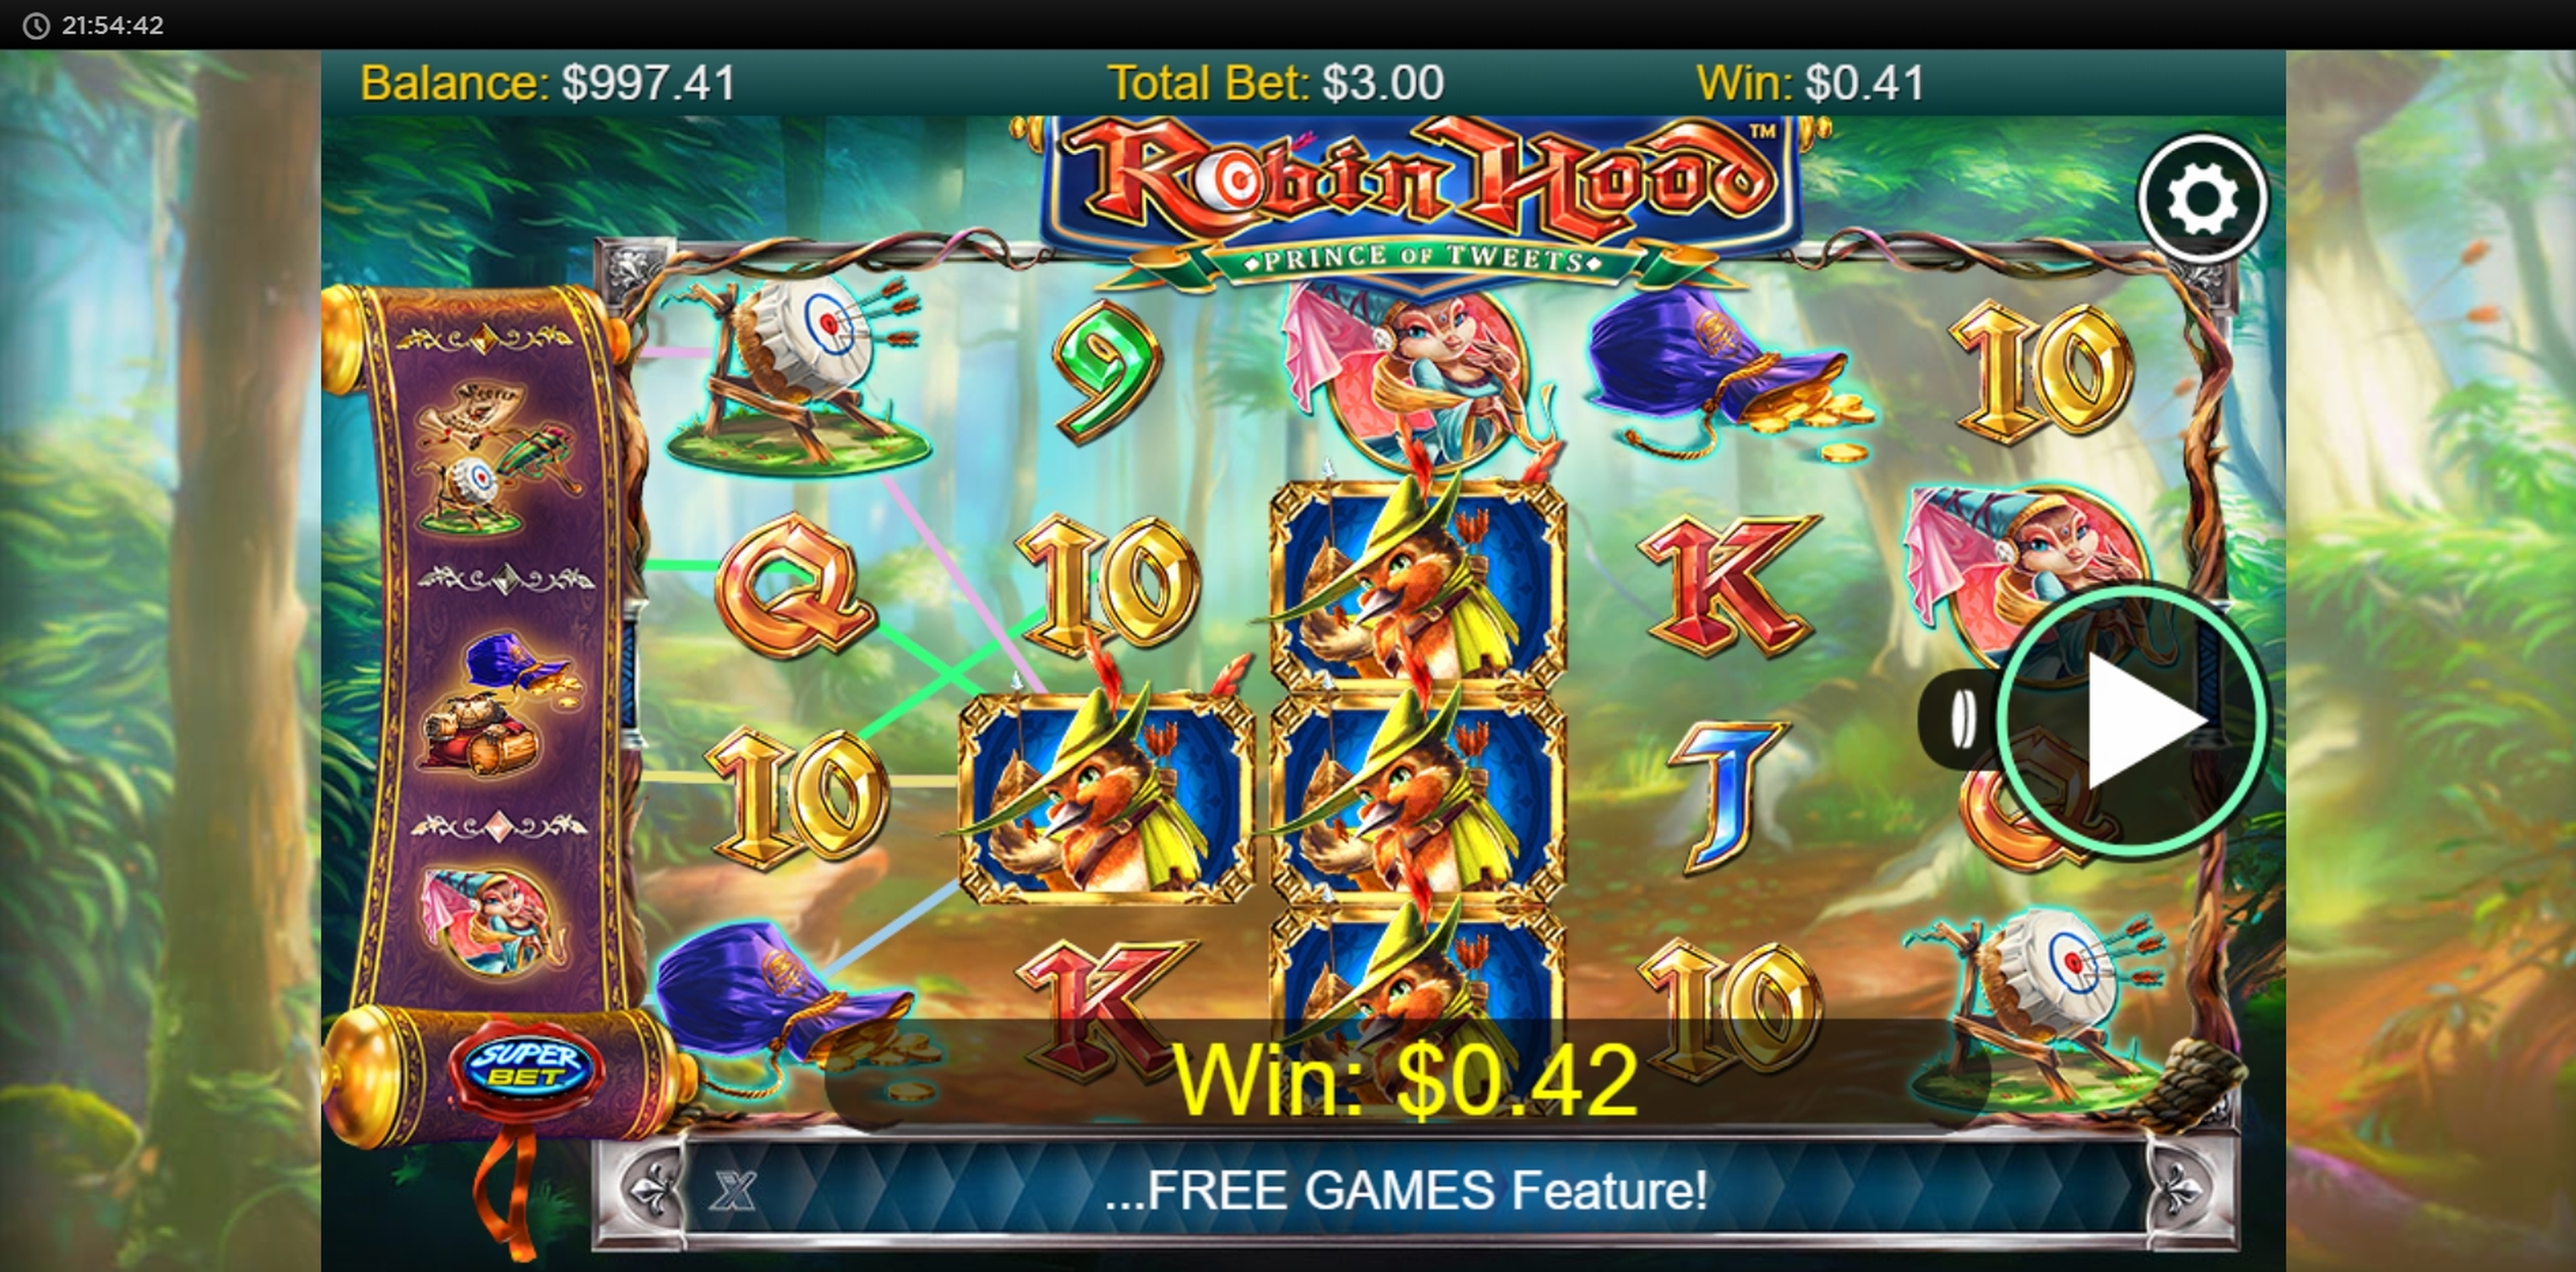 Win Money in Robin Hood - The Prince of Tweets Free Slot Game by NextGen Gaming